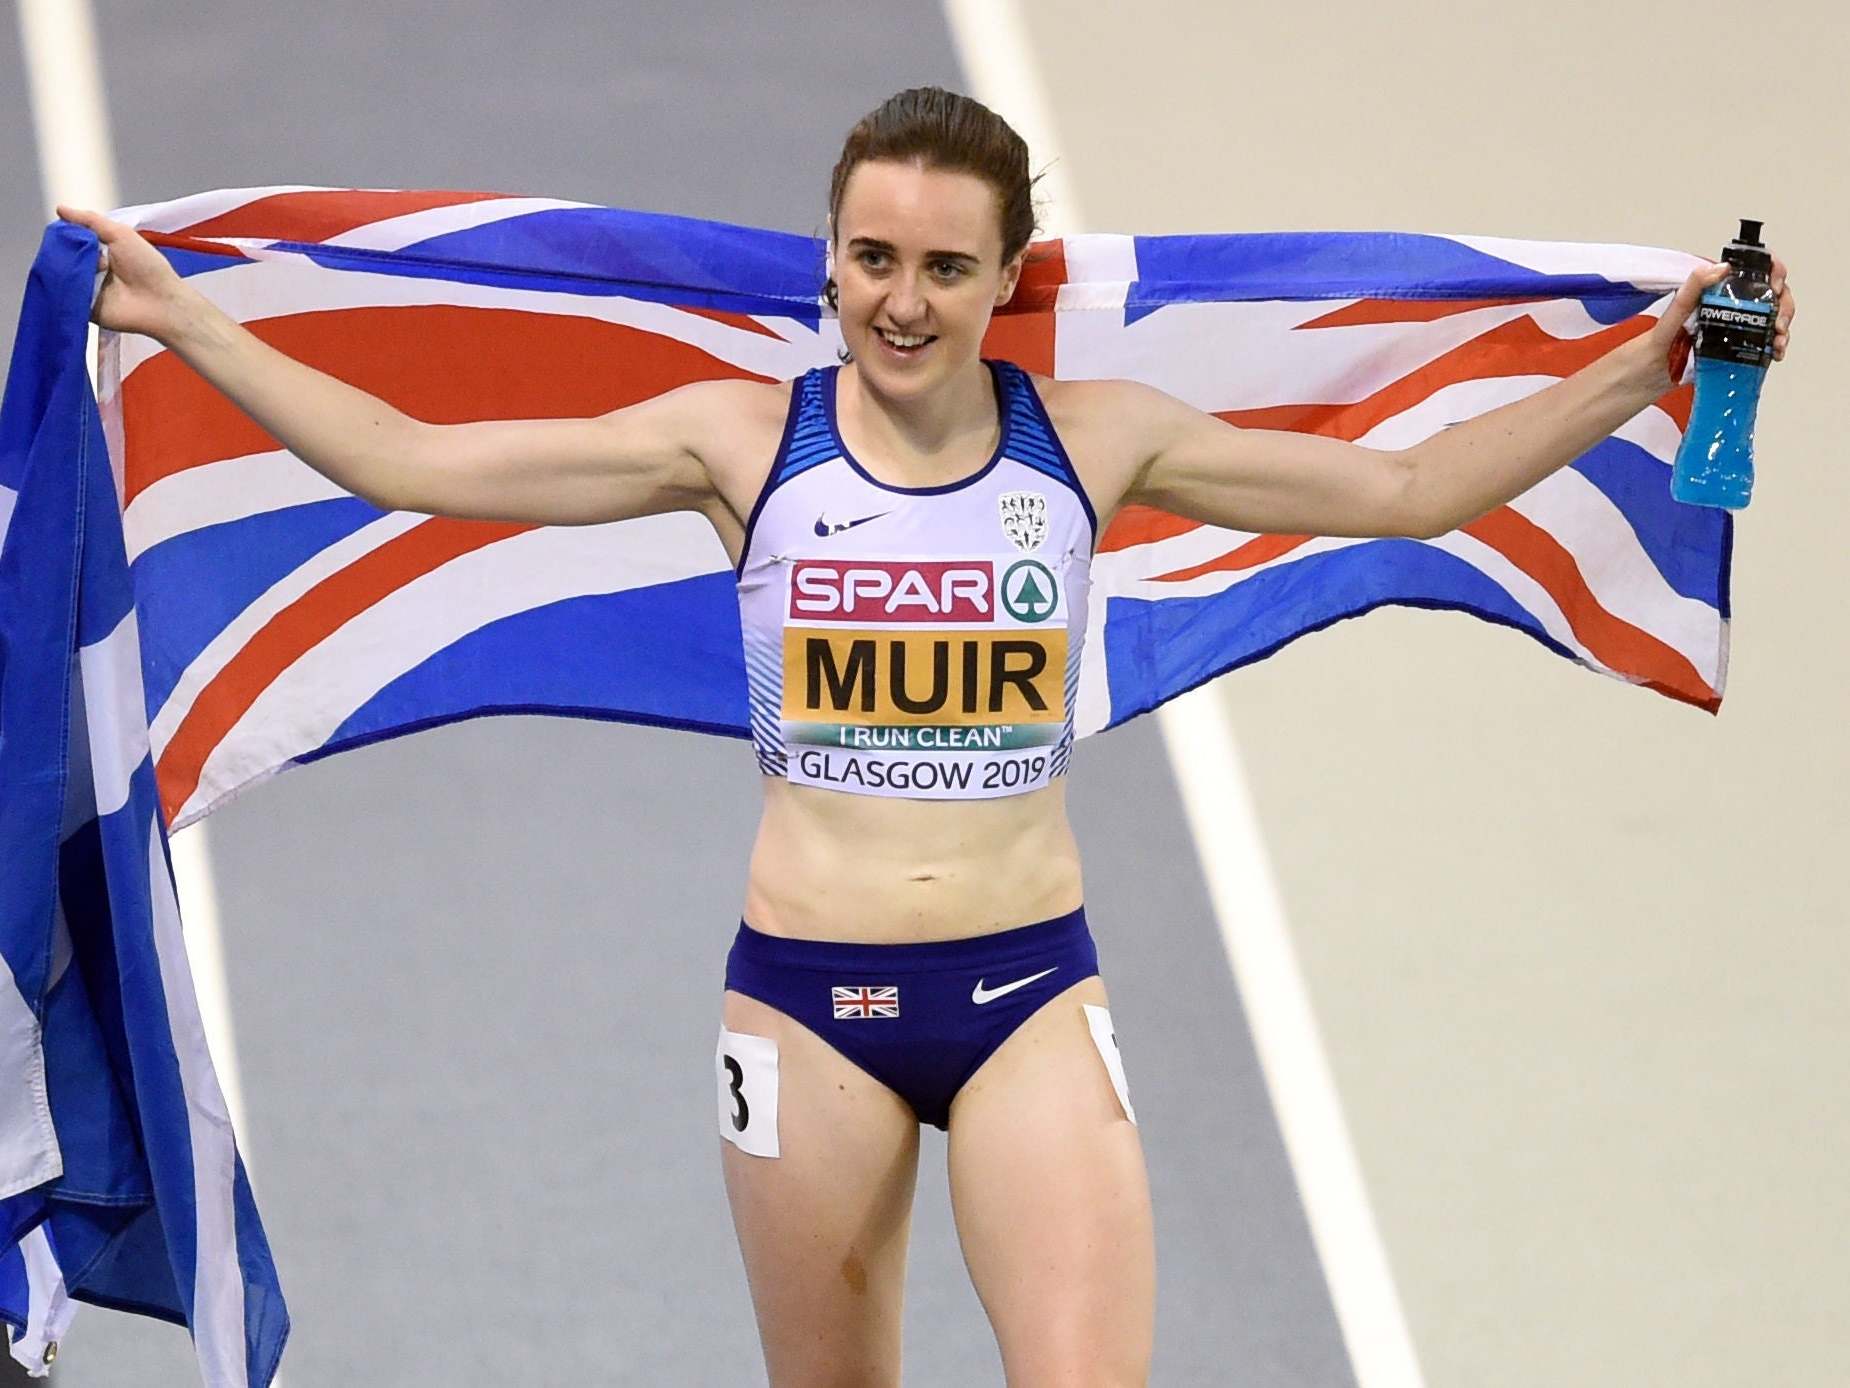 Muir has ambitions to land a medal in Tokyo